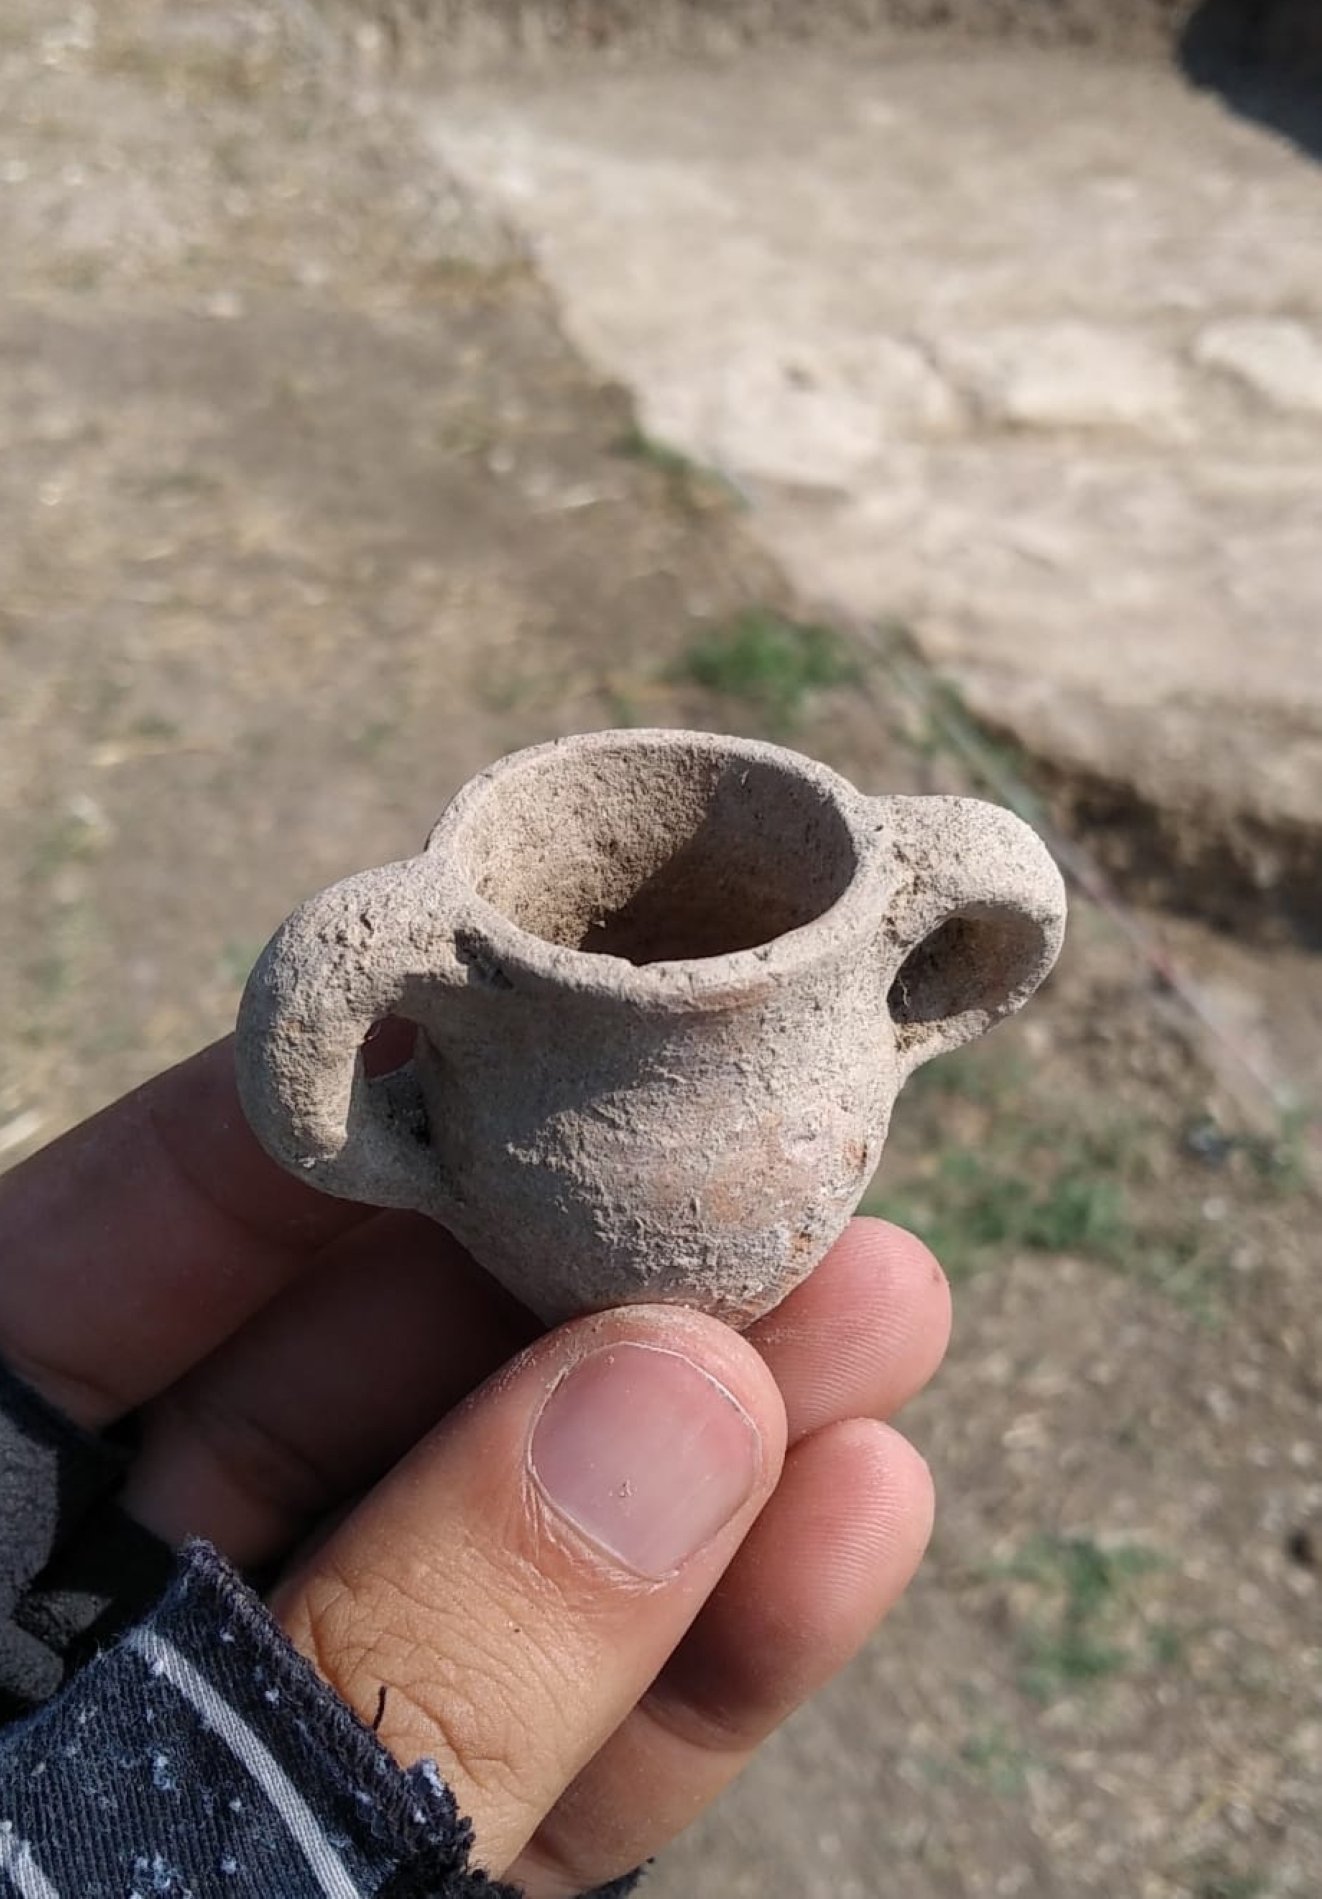 A view from the 1,600-year-old inkwell found in ancient Bathonea, Istanbul, Türkiye, Sept. 15, 2022. (AA Photo)